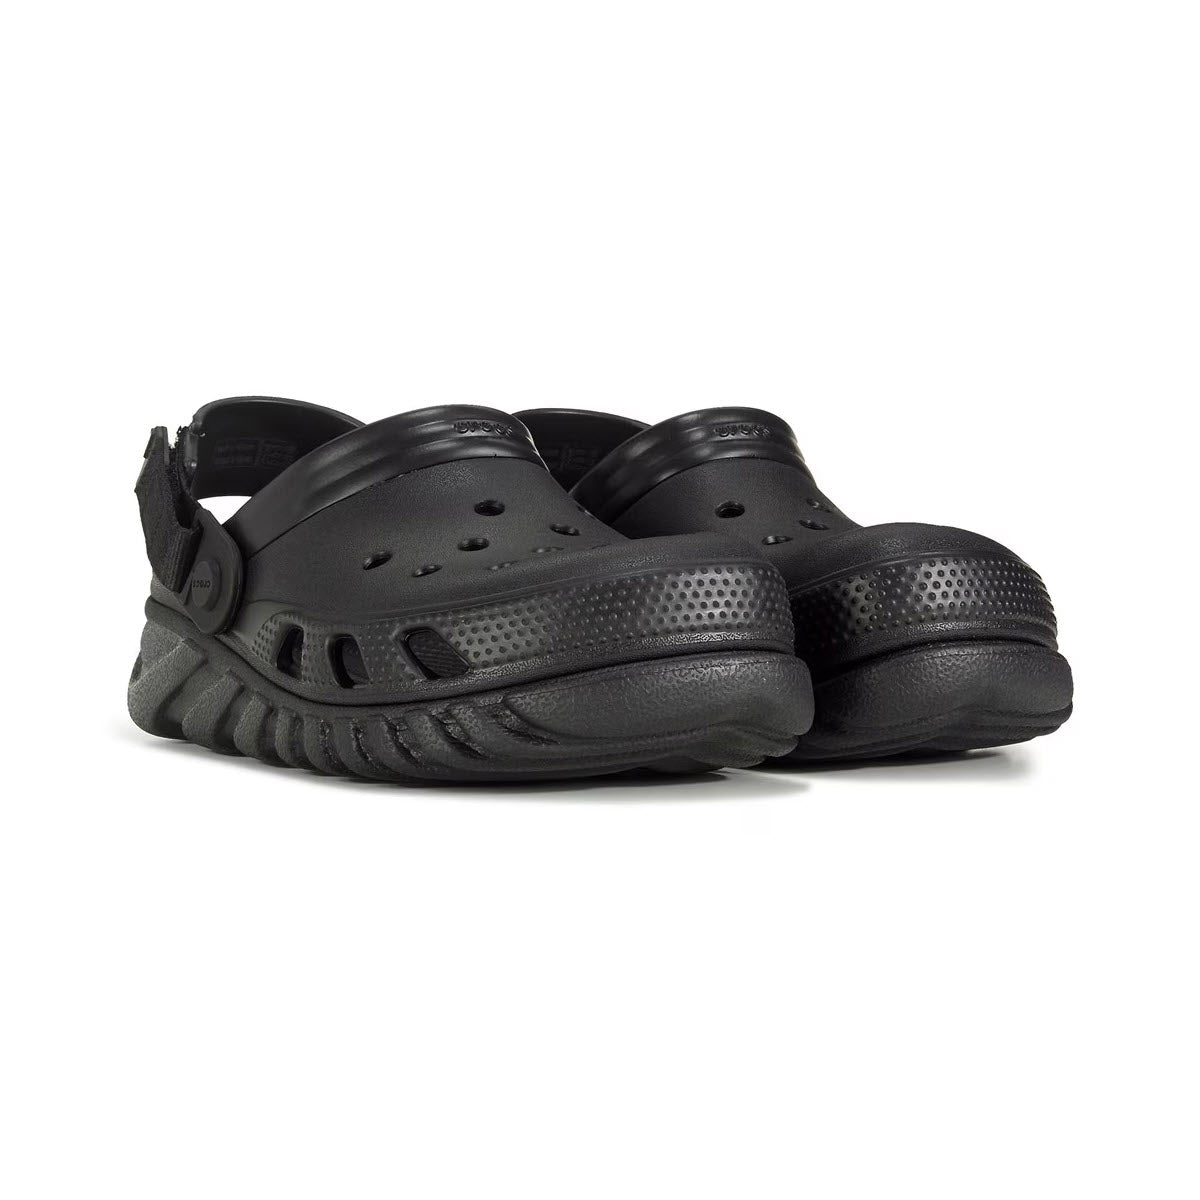 A pair of black Crocs Duet Max II clog sandals featuring adjustable back straps and ventilation holes, displayed against a white background.